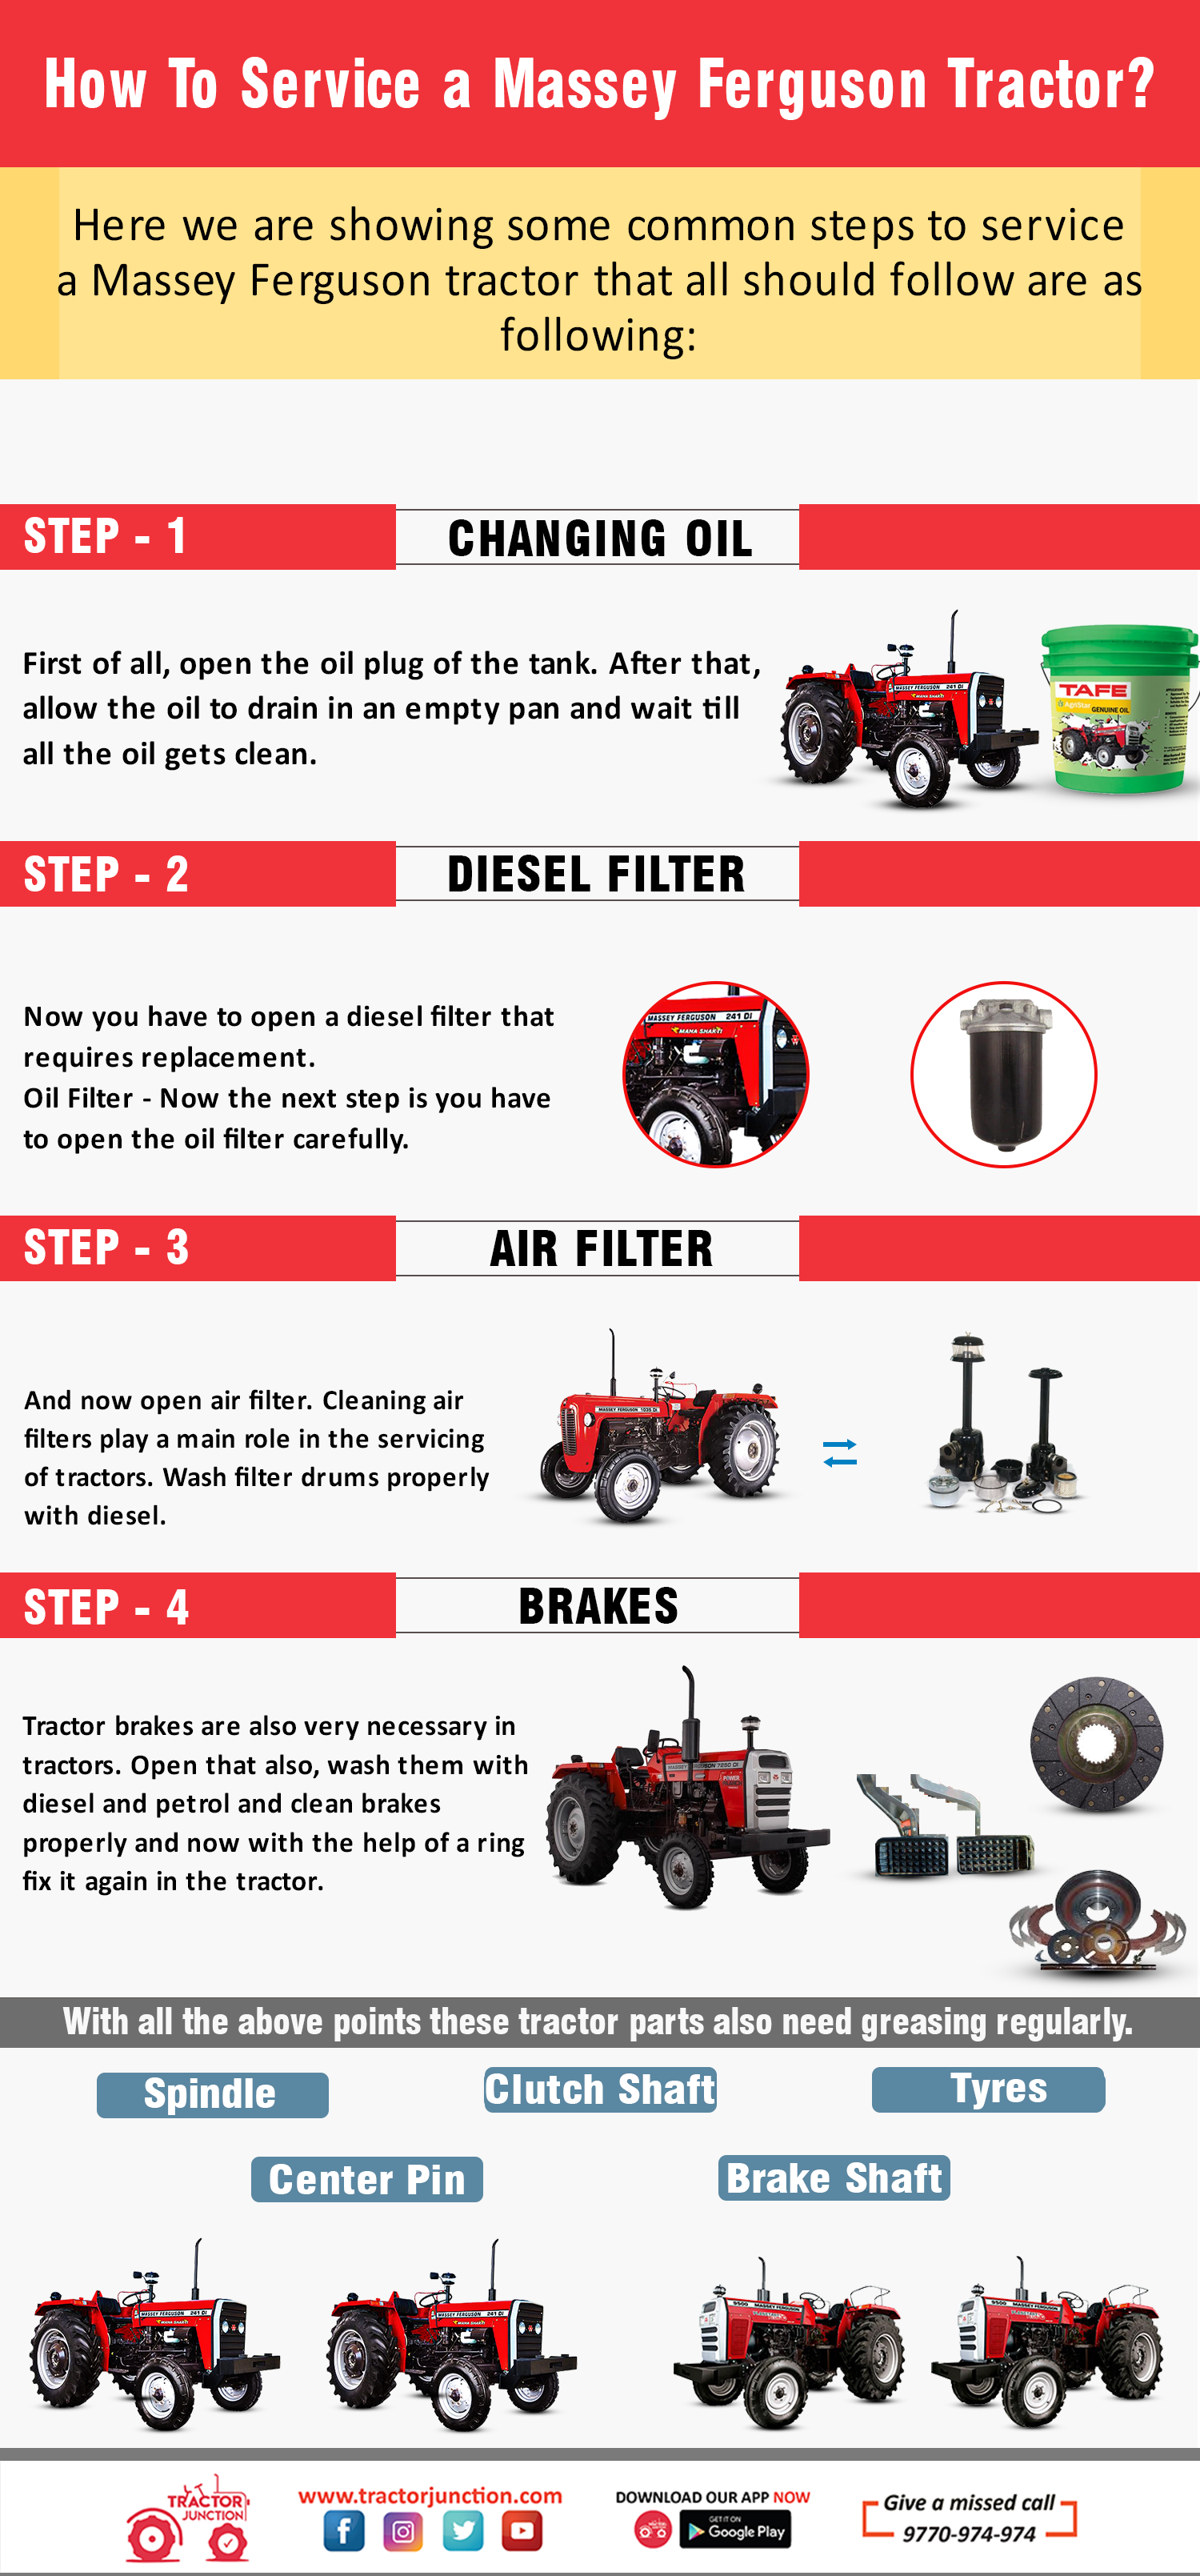 How to Service a Massey Ferguson Tractor - Infographic